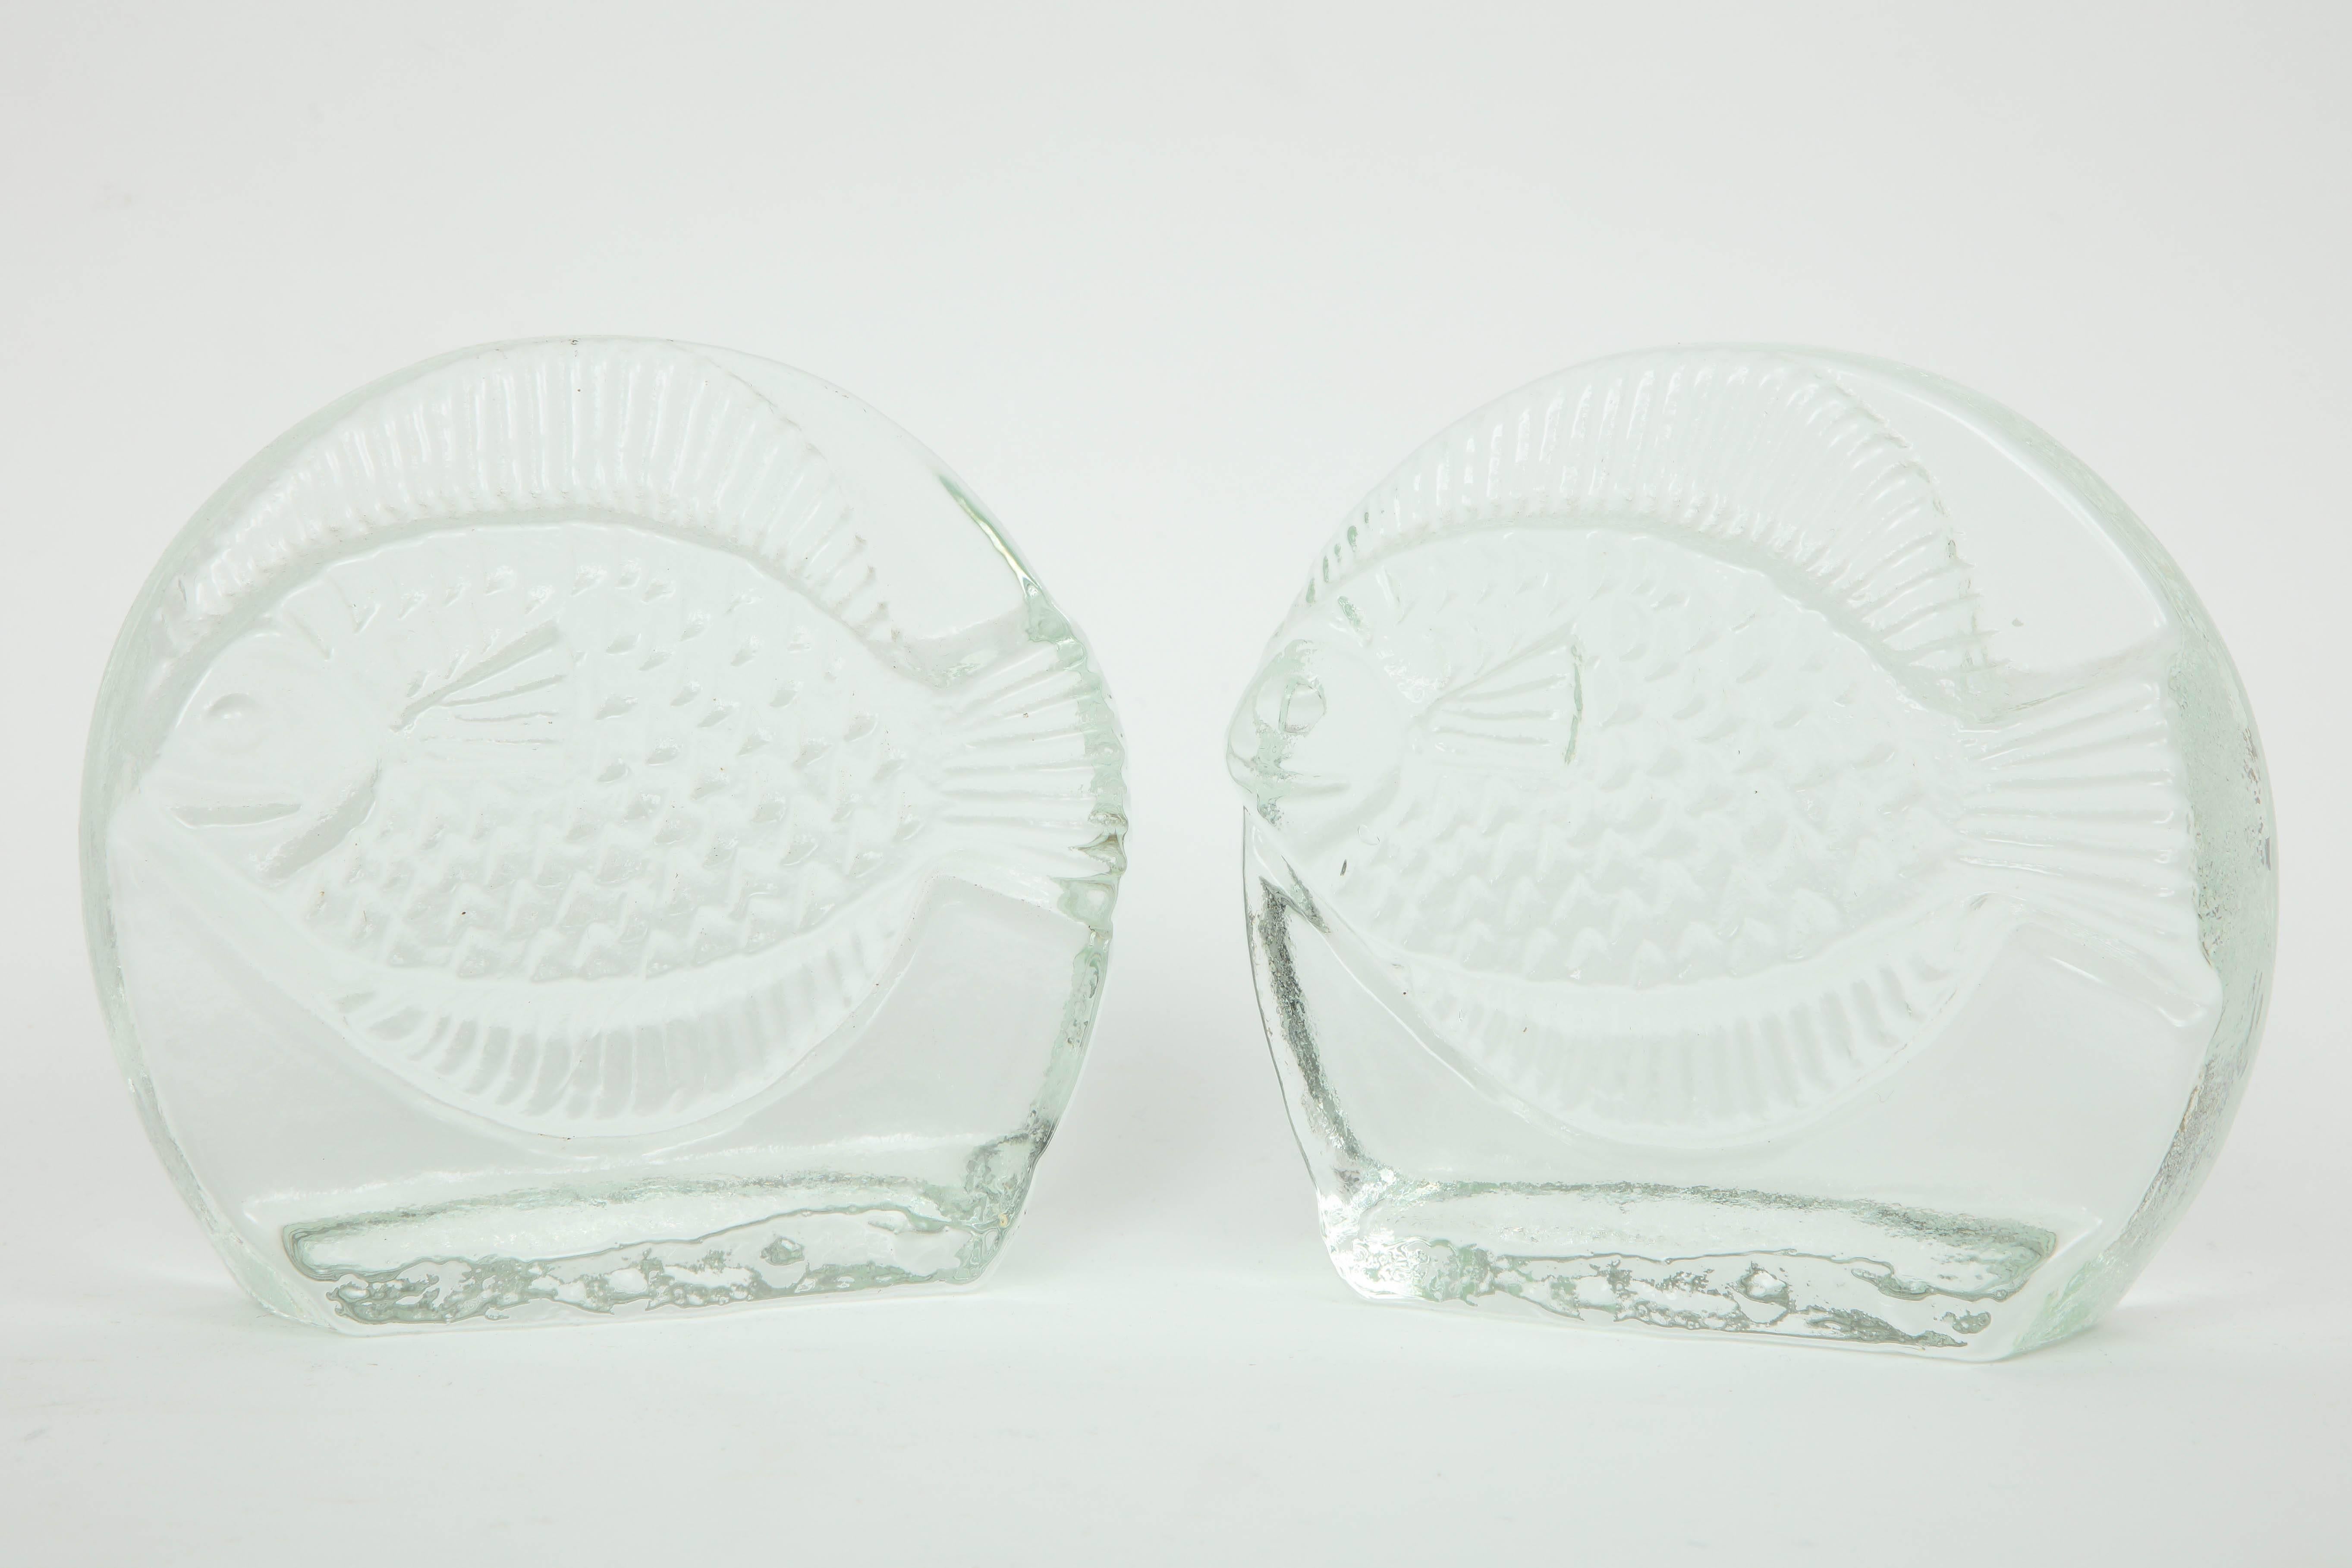 Midcentury solid cast glass bookends depicting a fish in bas relief technique.